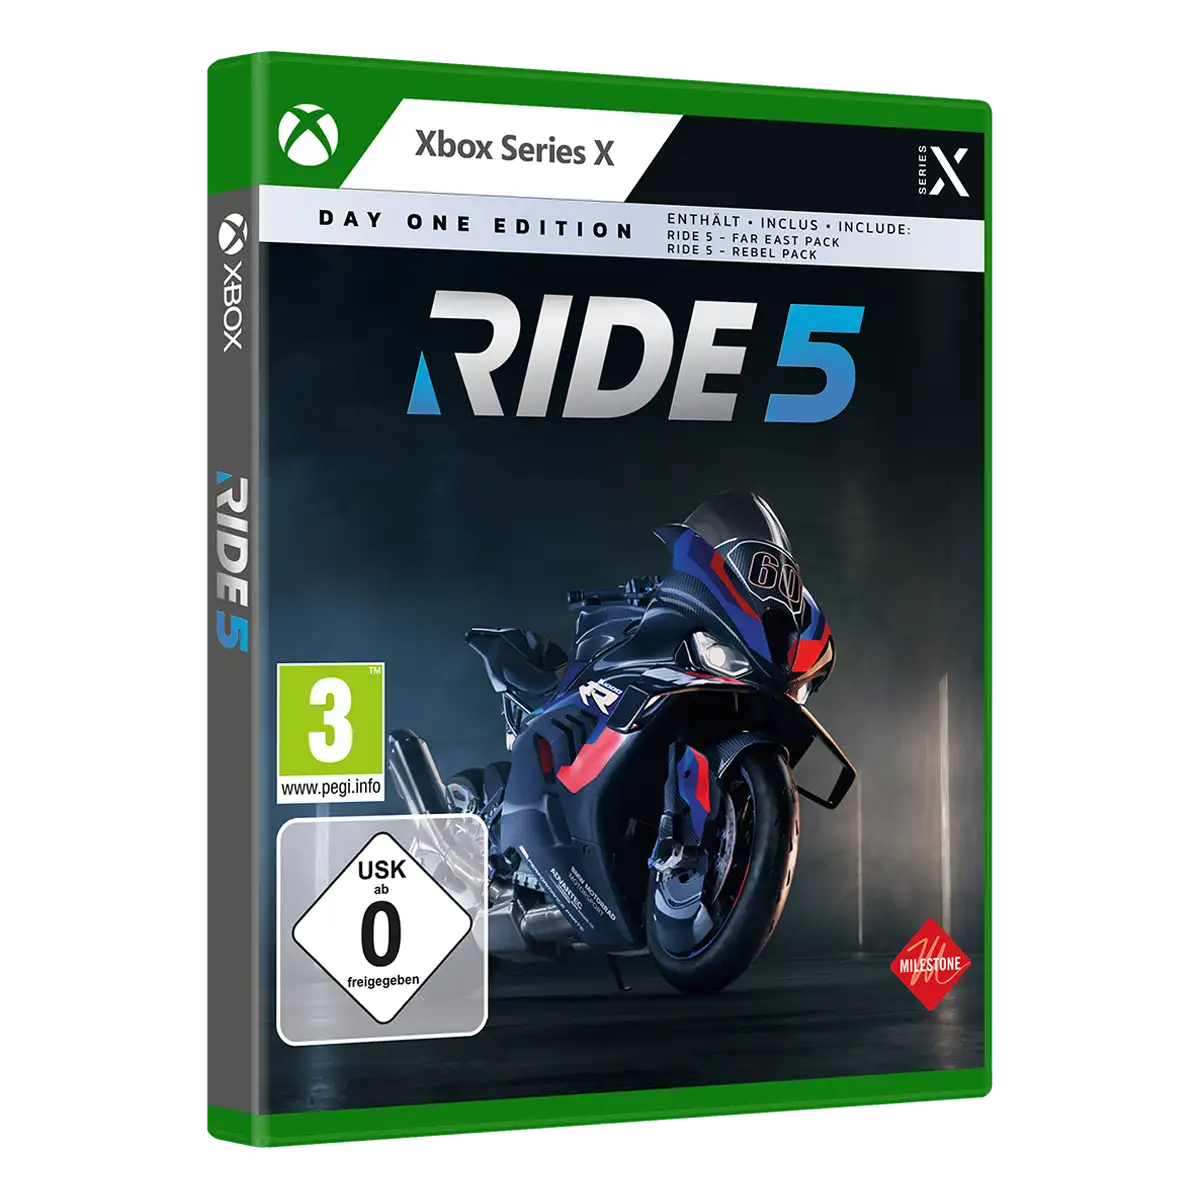 RIDE 5 Day One Edition (Xbox Series X) Image 2